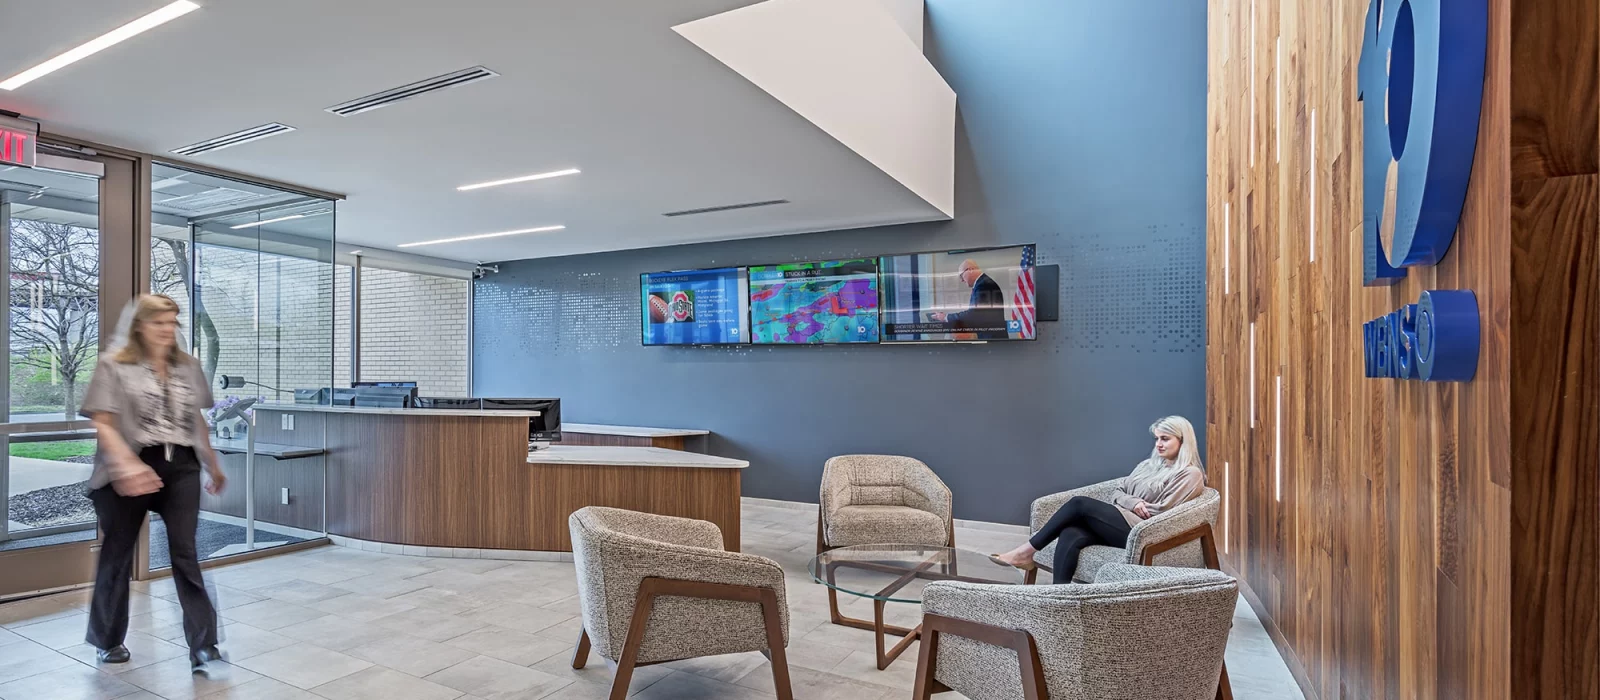 WBNS 10TV Lobby + Office Renovation | Experiential Design